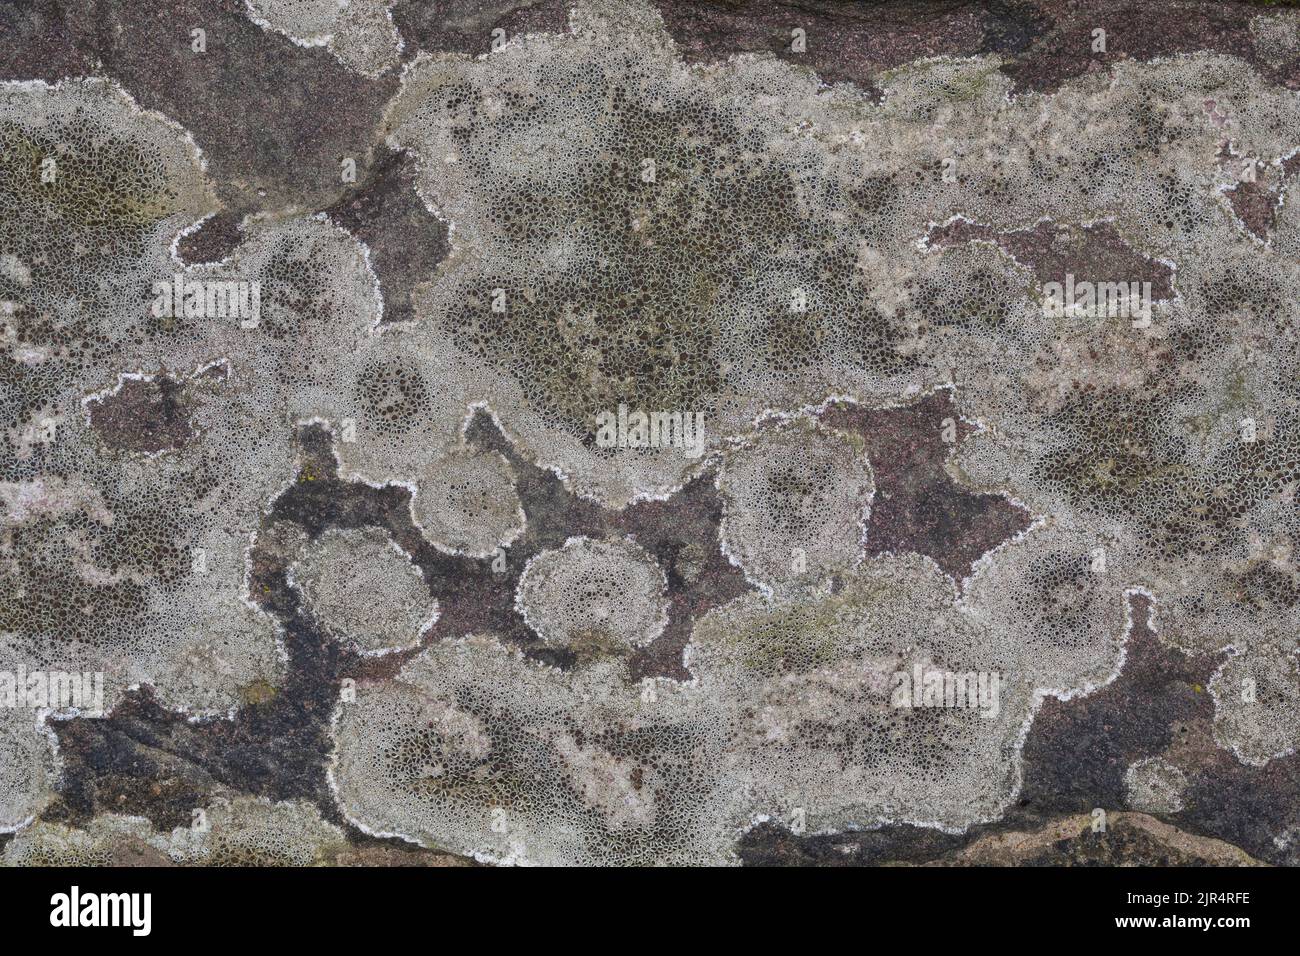 Crustose lichen (Lecanora campestris), grow on a wall, Germany Stock Photo